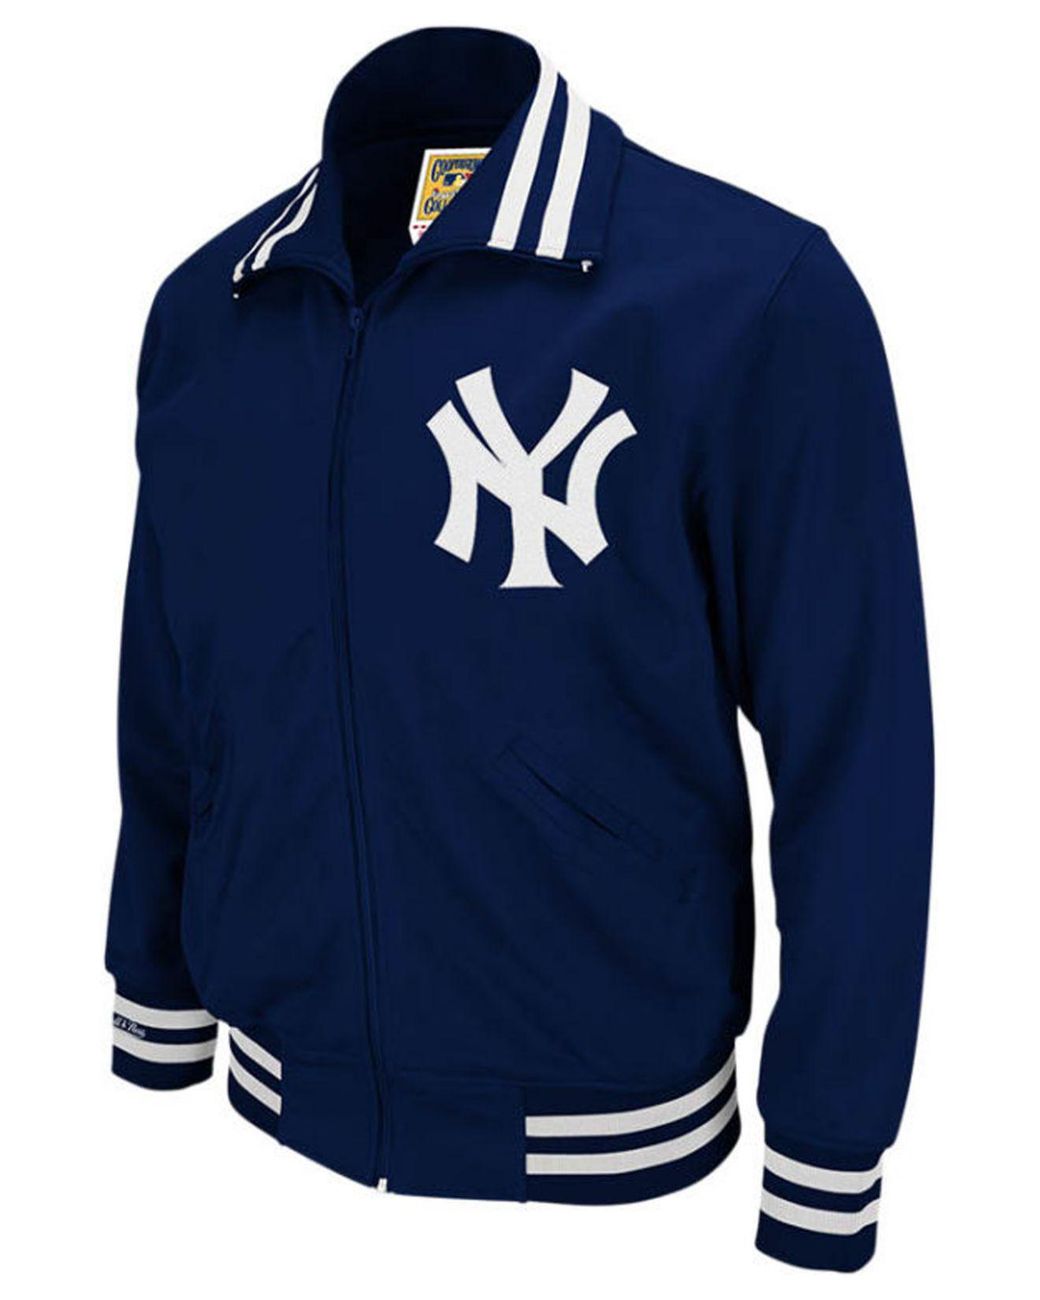 mitchell and ness 1988 yankees jacket